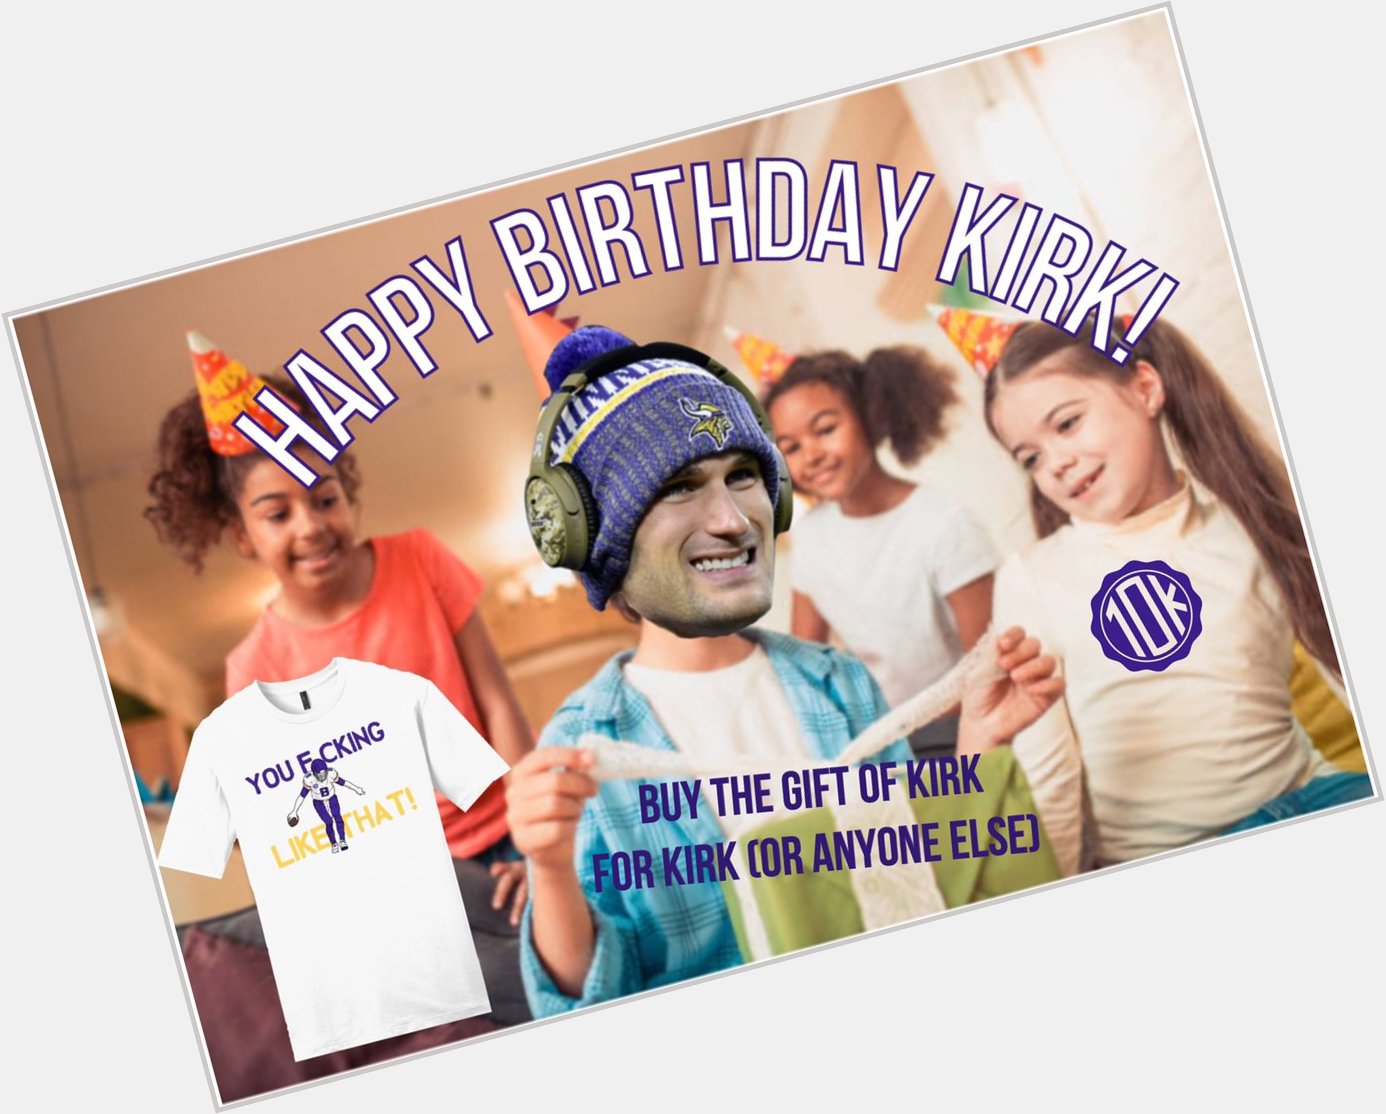  Happy Birthday Kirk Cousins! Get the gift that everyone FUCKING LIKES!   LINK

 